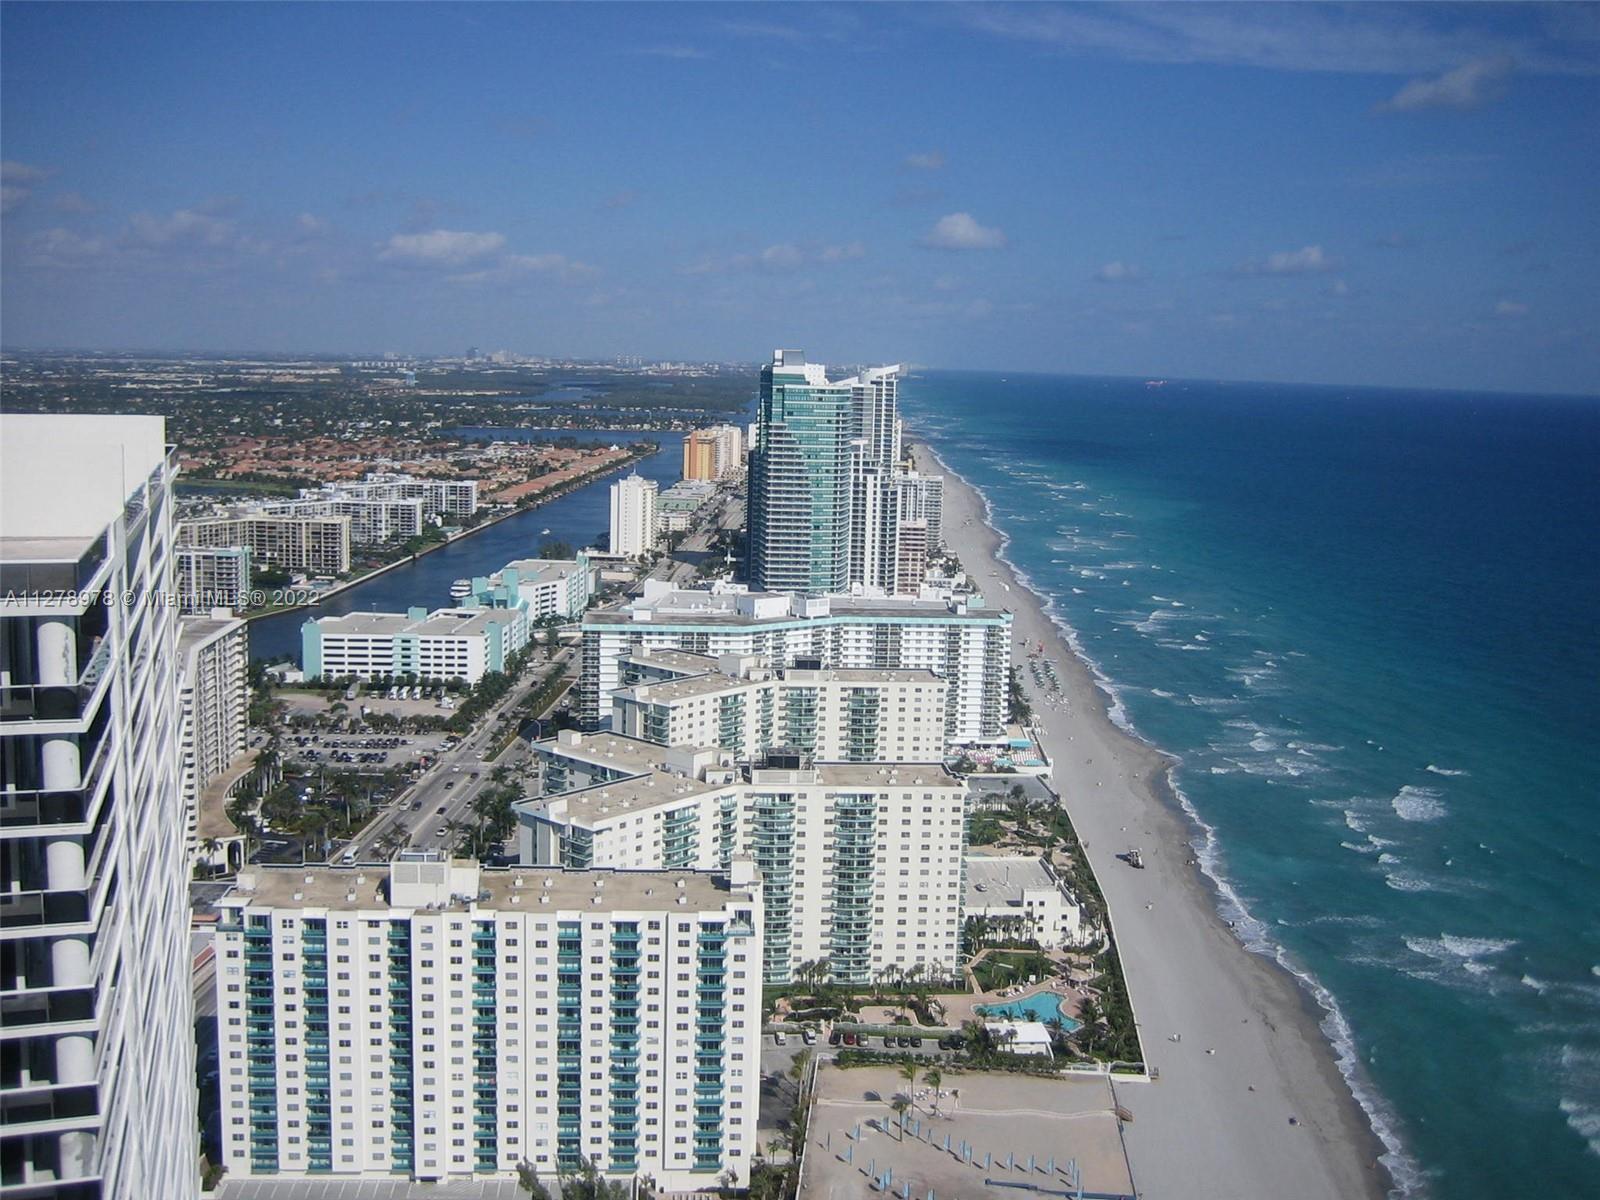 Beautifull ocean and city view from every room! Oceanfront condo with 5-star resort like amenities s